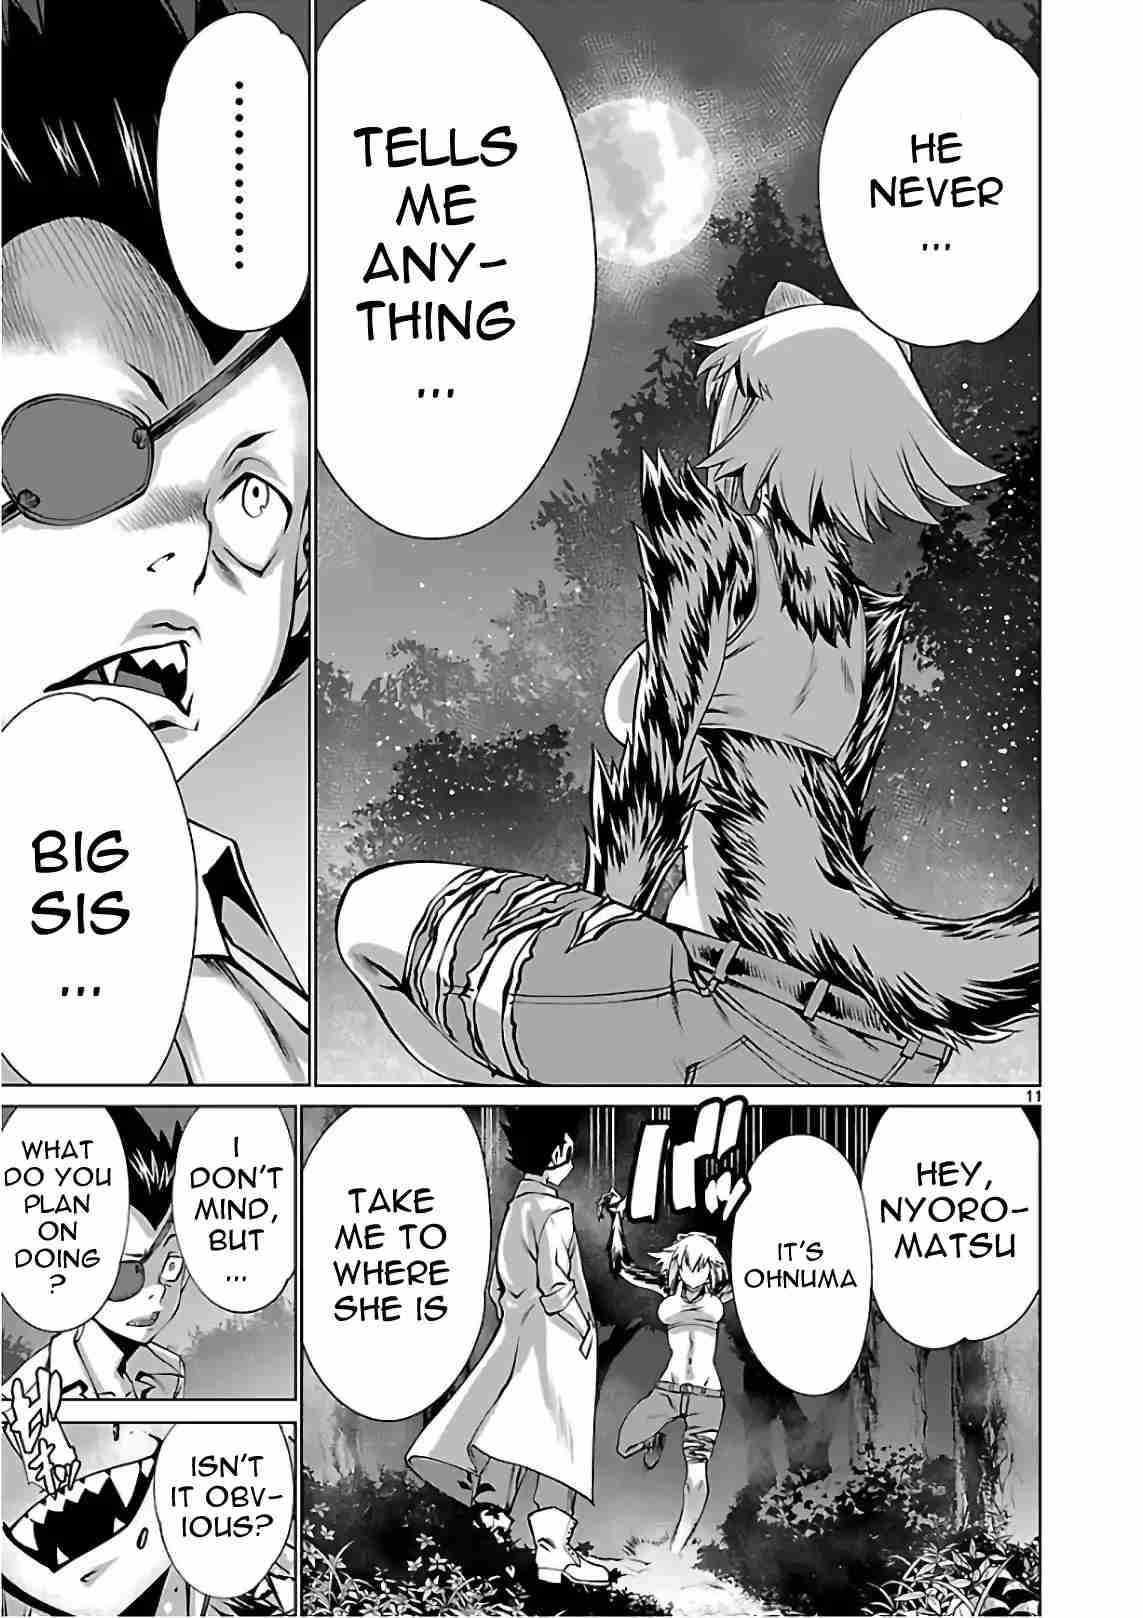 Killing Bites Vol. 11 Ch. 54 They're All Going to Die!